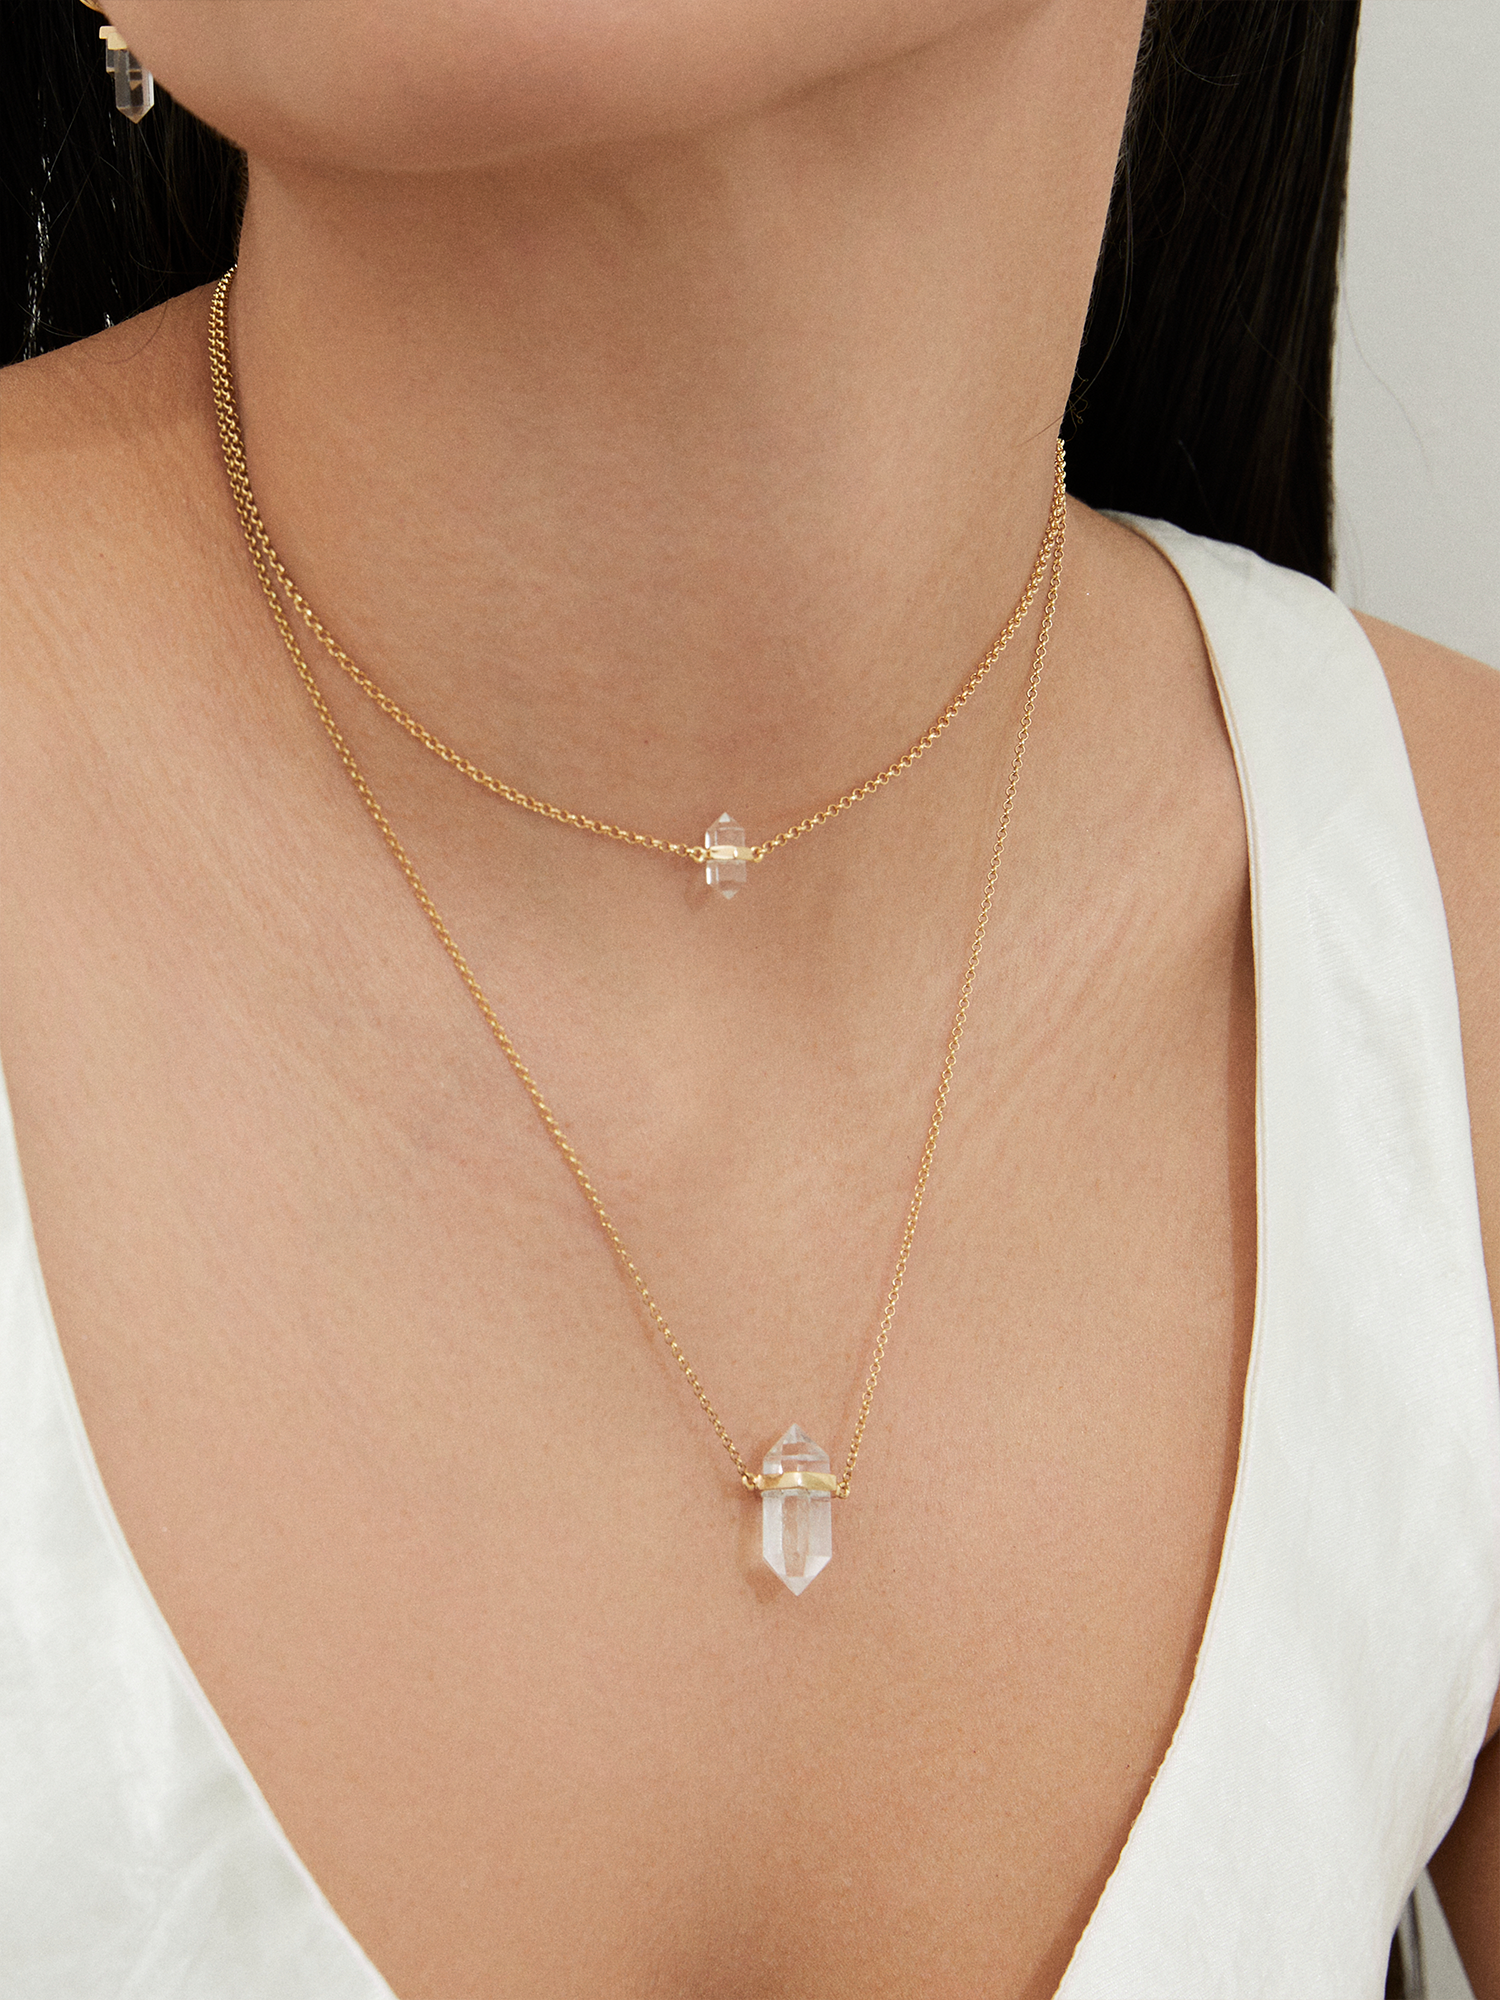 10 Year Anniversary Necklace | Clear Quartz | Limited Edition